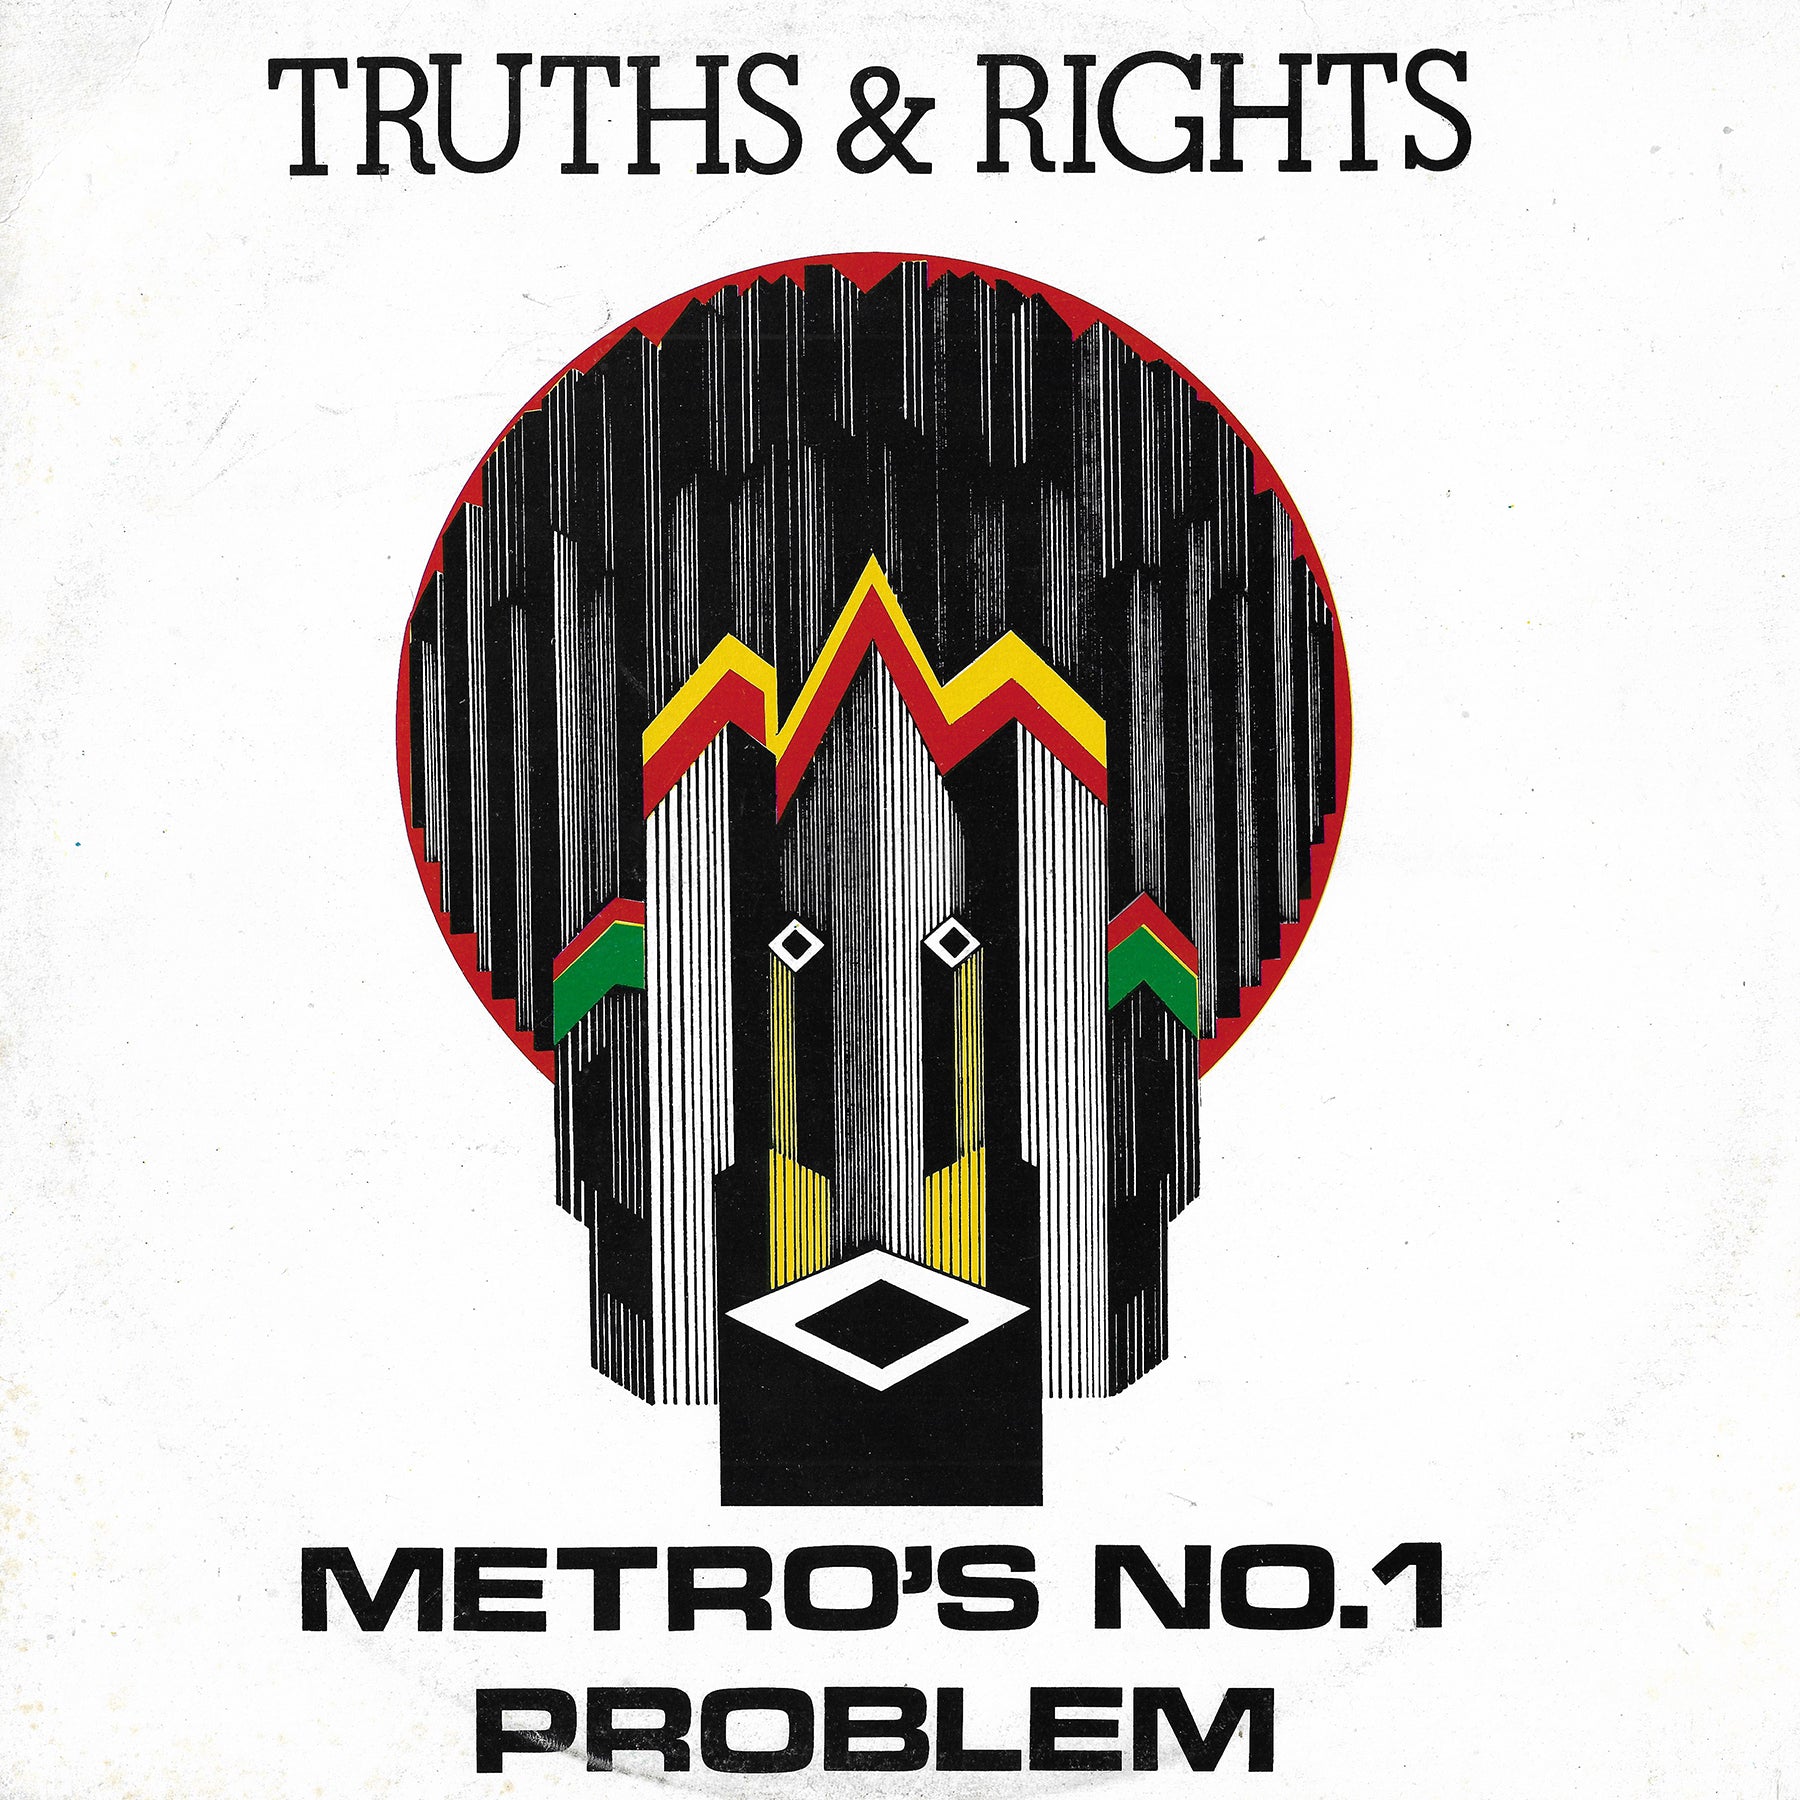 Truths & Rights - Metro's No. 1 Problem